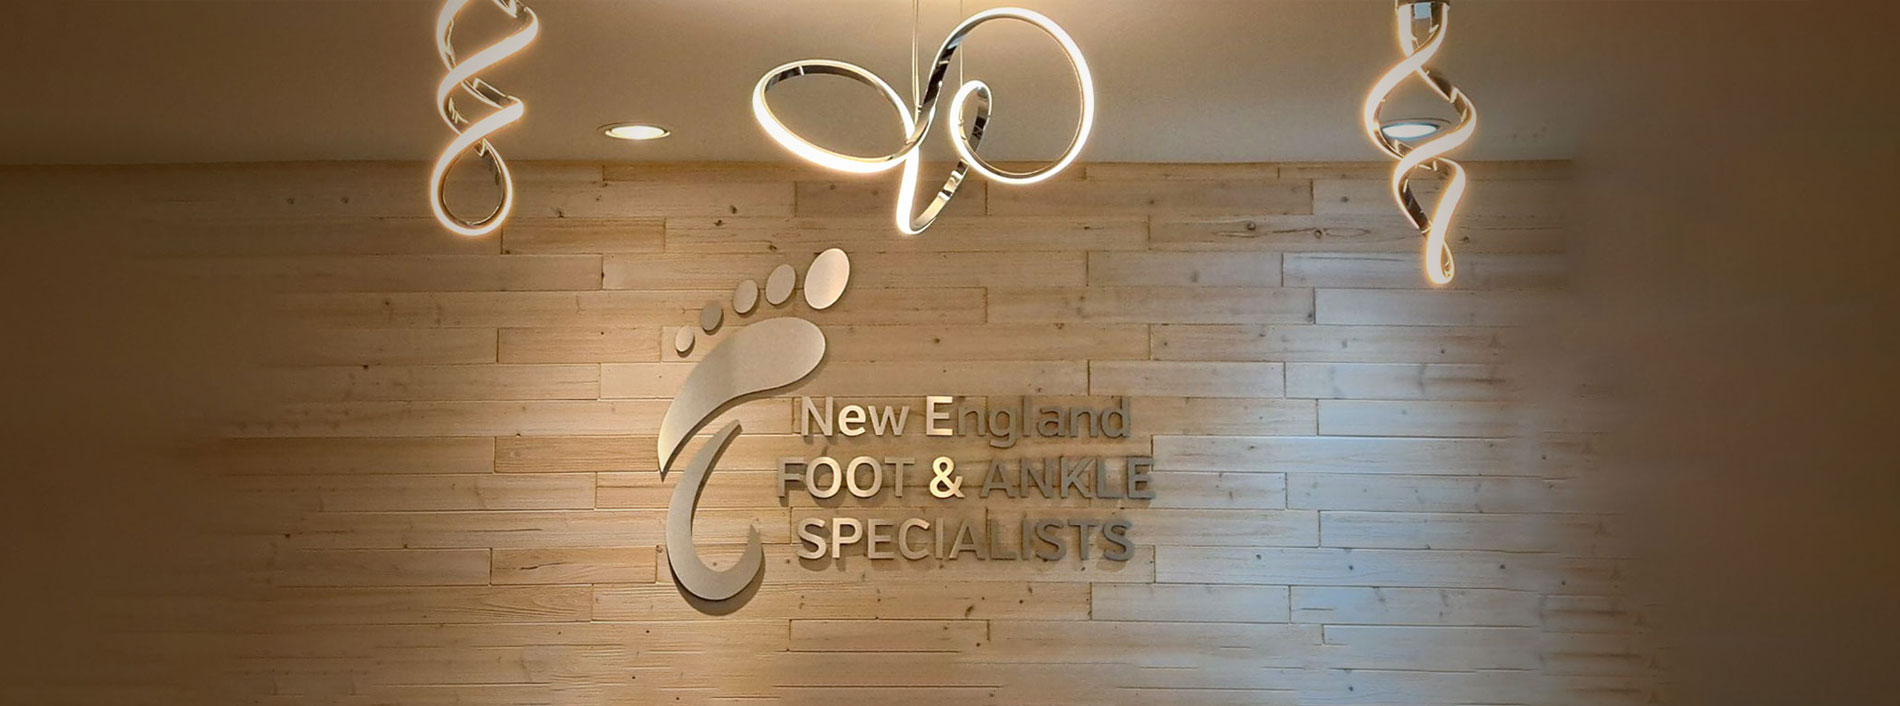 New England Foot & Ankle Specialists